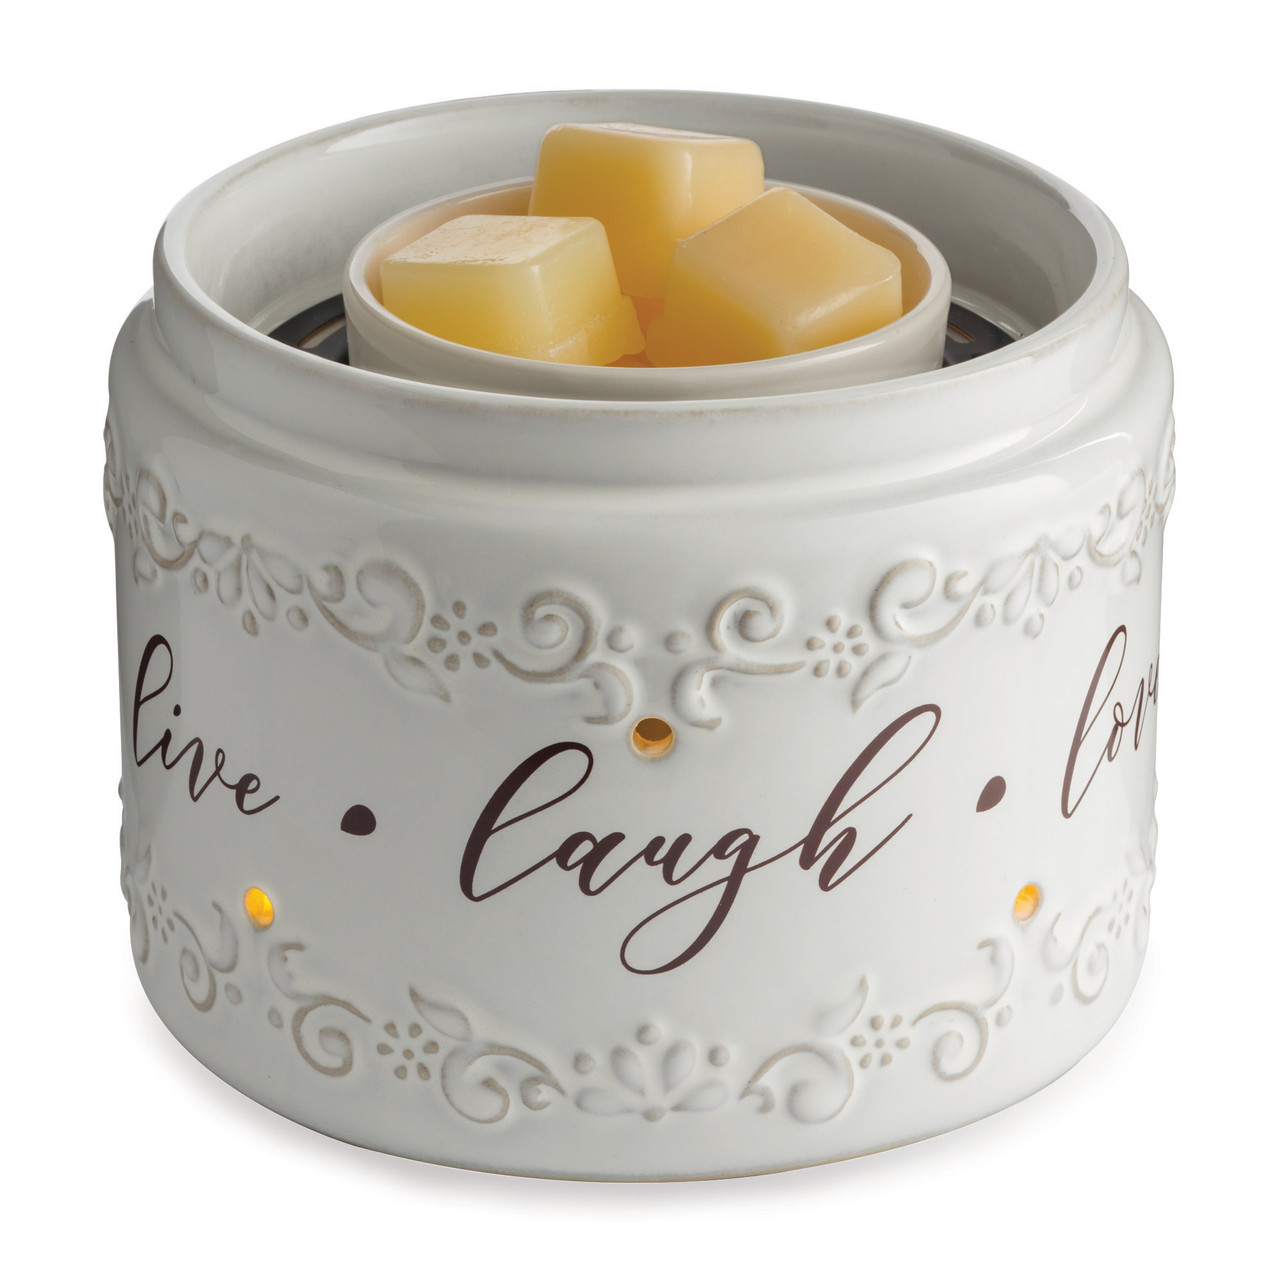 Live-Laugh-Love Wax Melt Warmer Set in Colorado Springs, CO